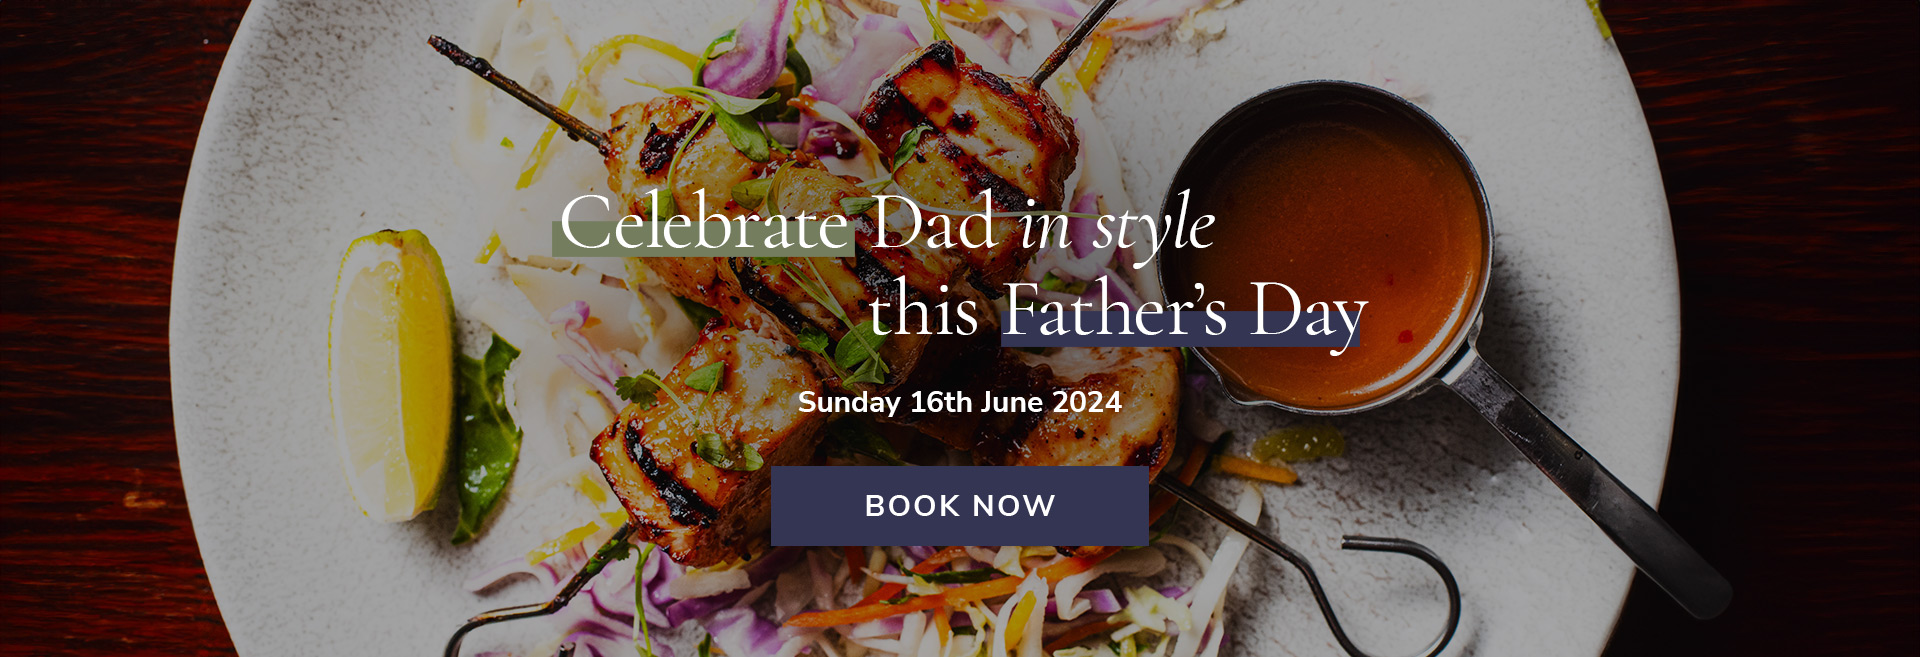 Father's Day at The Princess Of Wales